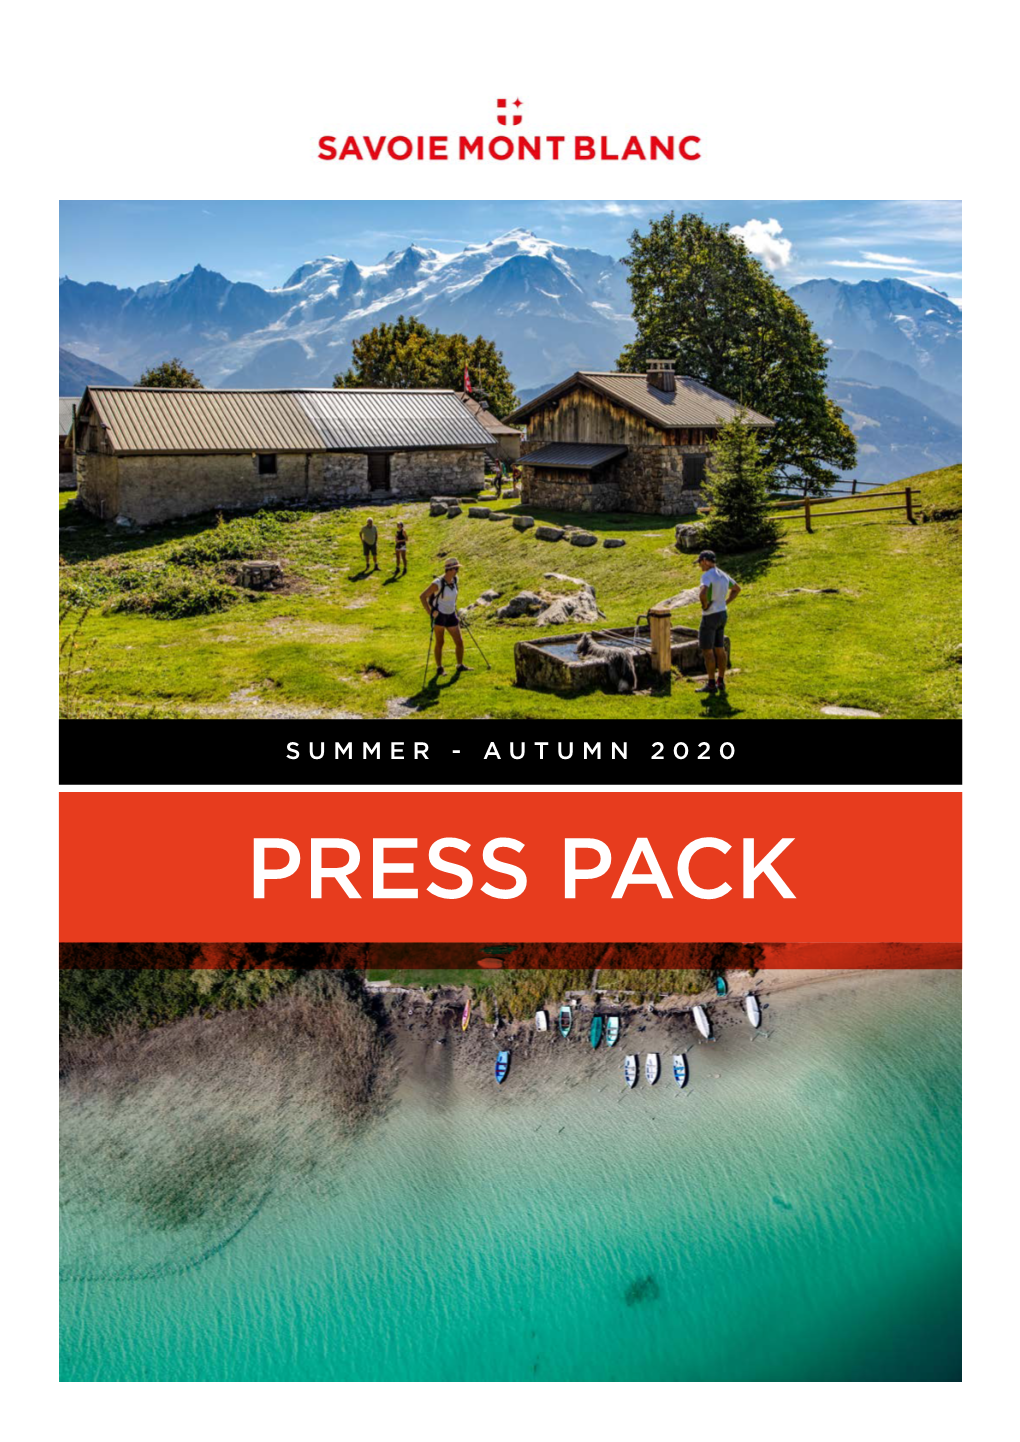 Download the Press Pack Summer / Autumn 2020